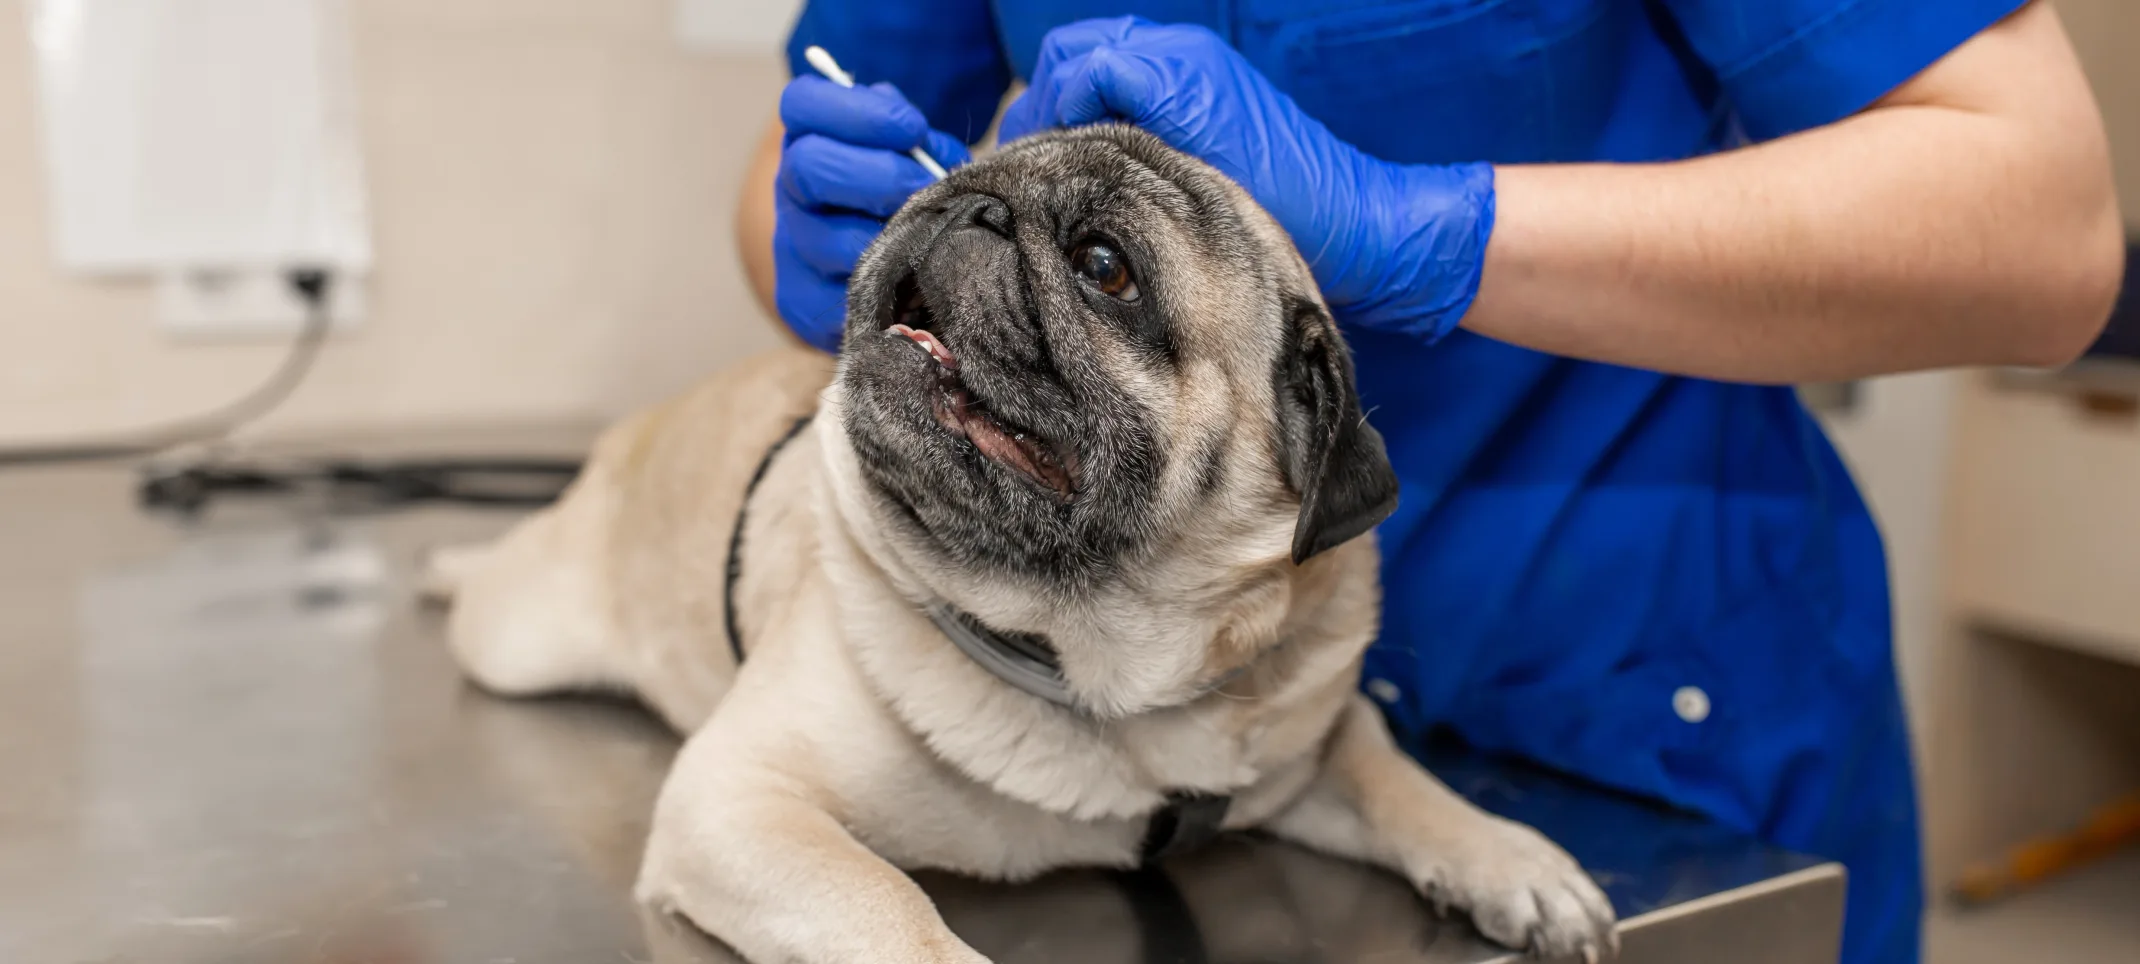 Vet cleaning a dog's ear